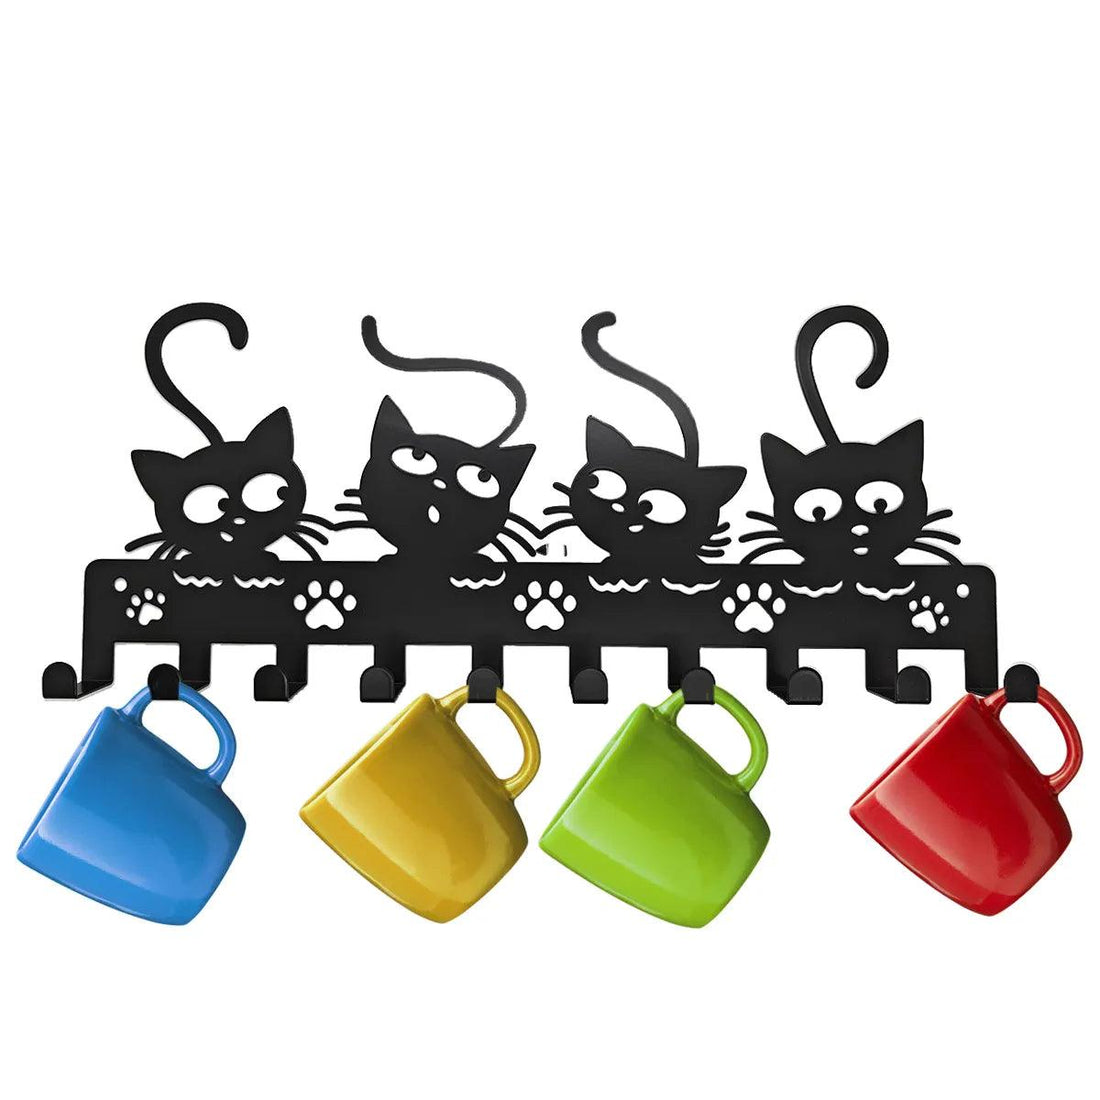 Decorative Balck Cat Hooks Rack, 10 Hooks - Just Cats - Gifts for Cat Lovers